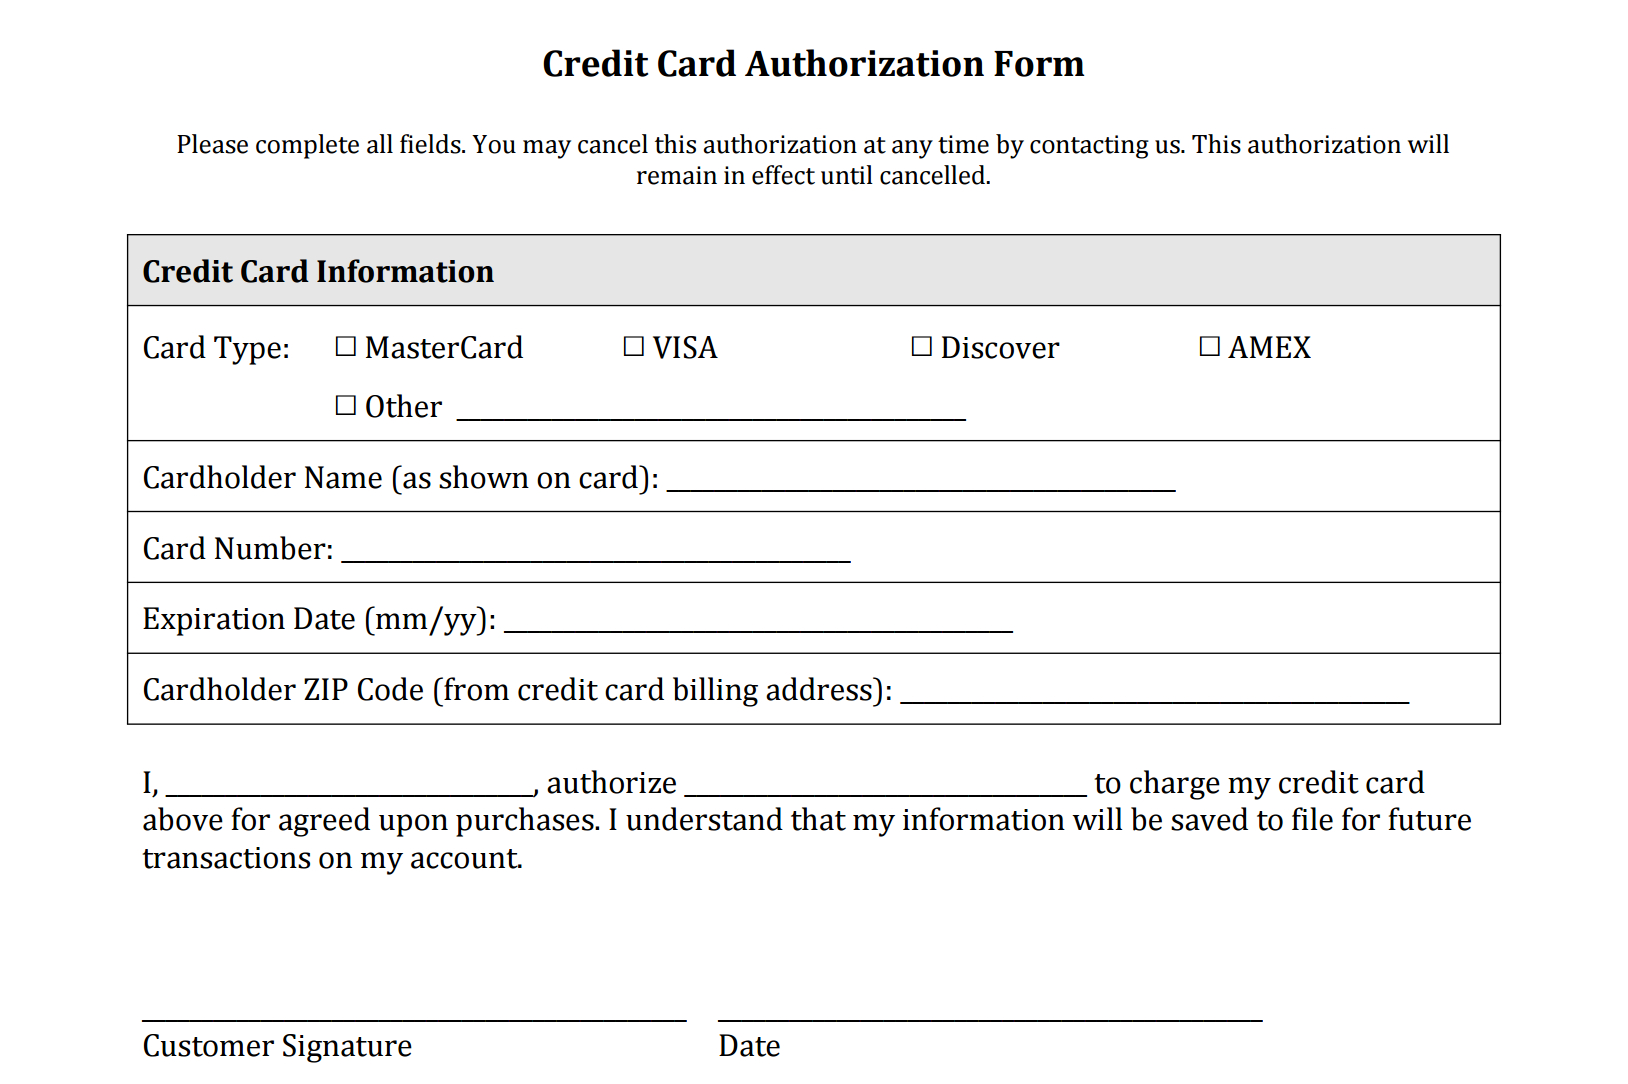 Free Credit Card Authorization Form Template - Calep Inside Credit Card Authorization Form Template Word